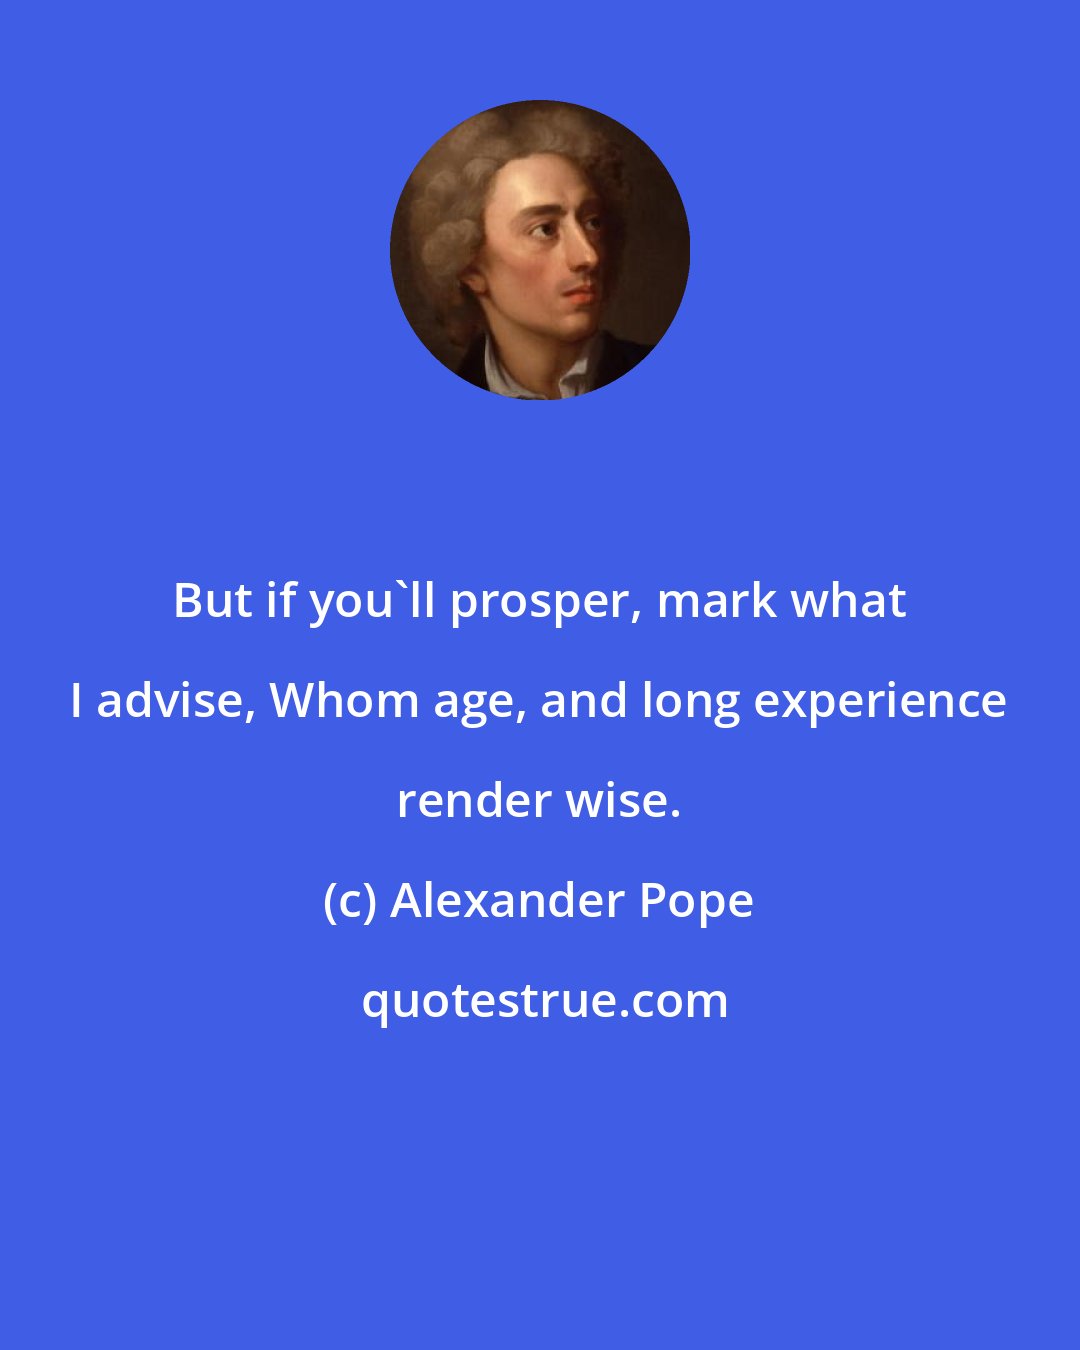 Alexander Pope: But if you'll prosper, mark what I advise, Whom age, and long experience render wise.